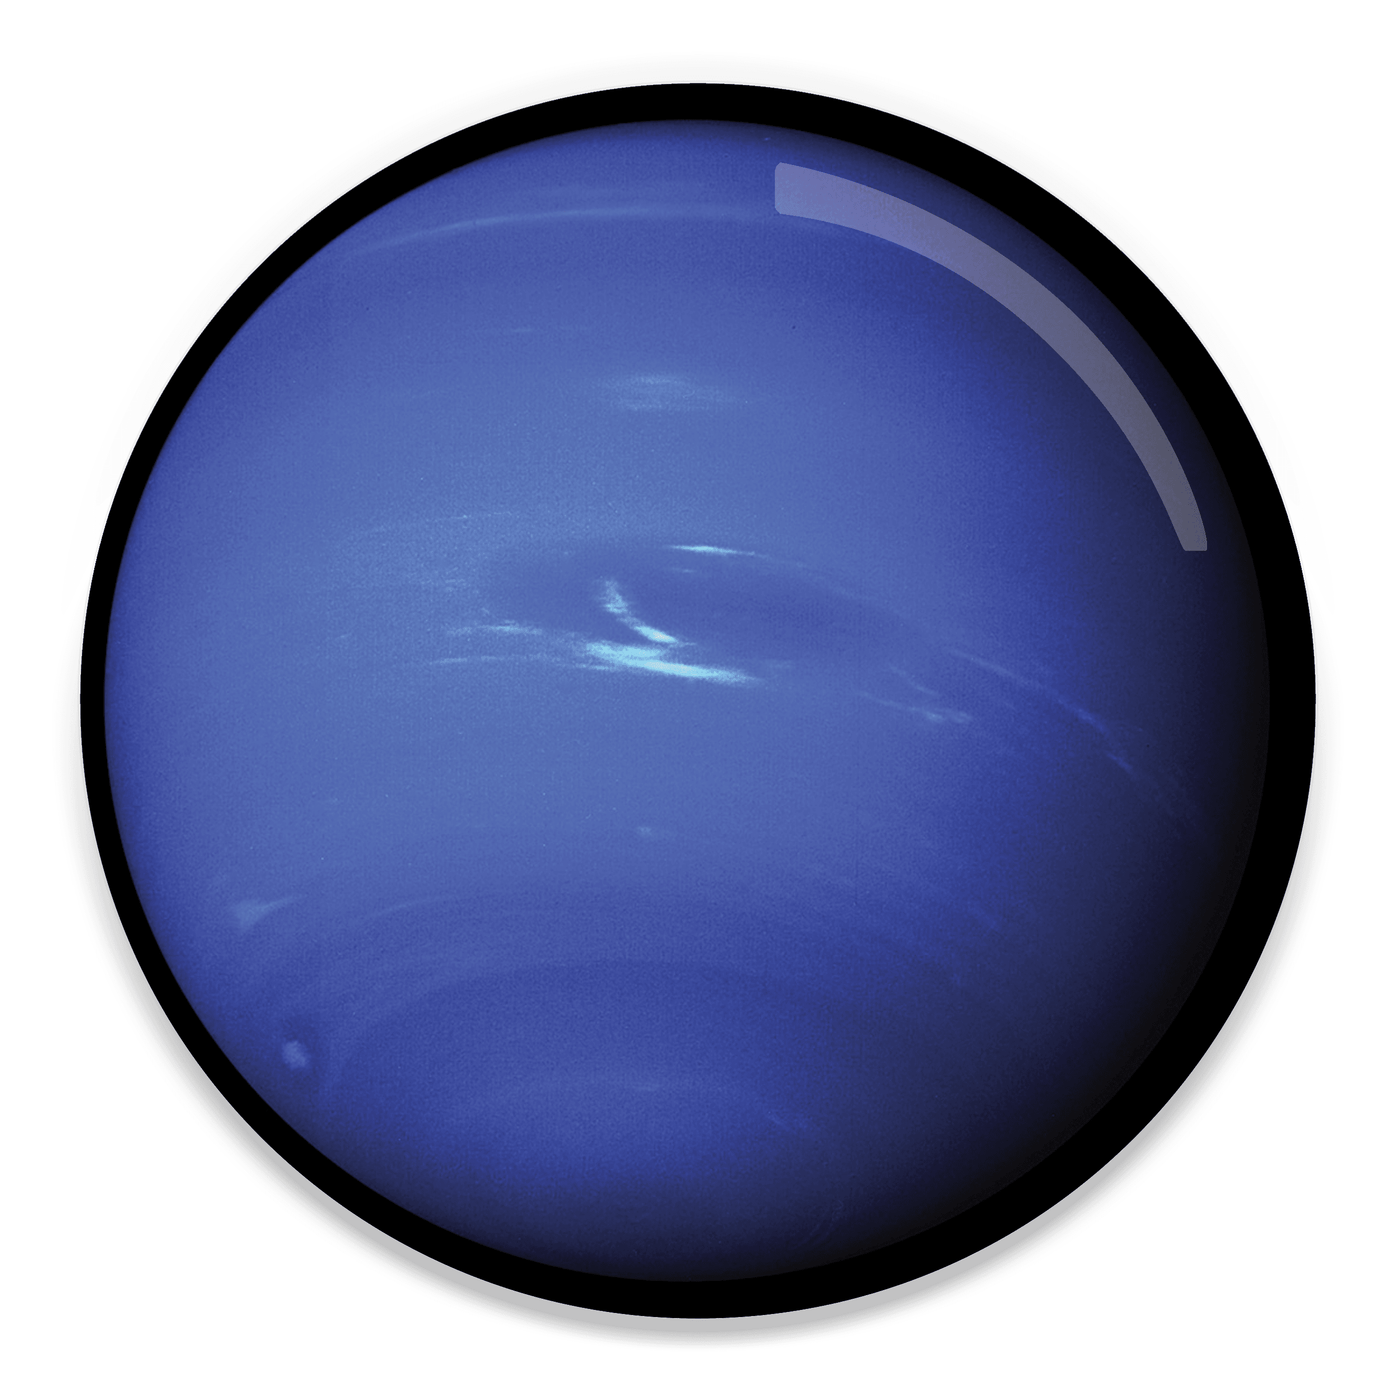 2.25 inch round colorful magnet with image of Neptune